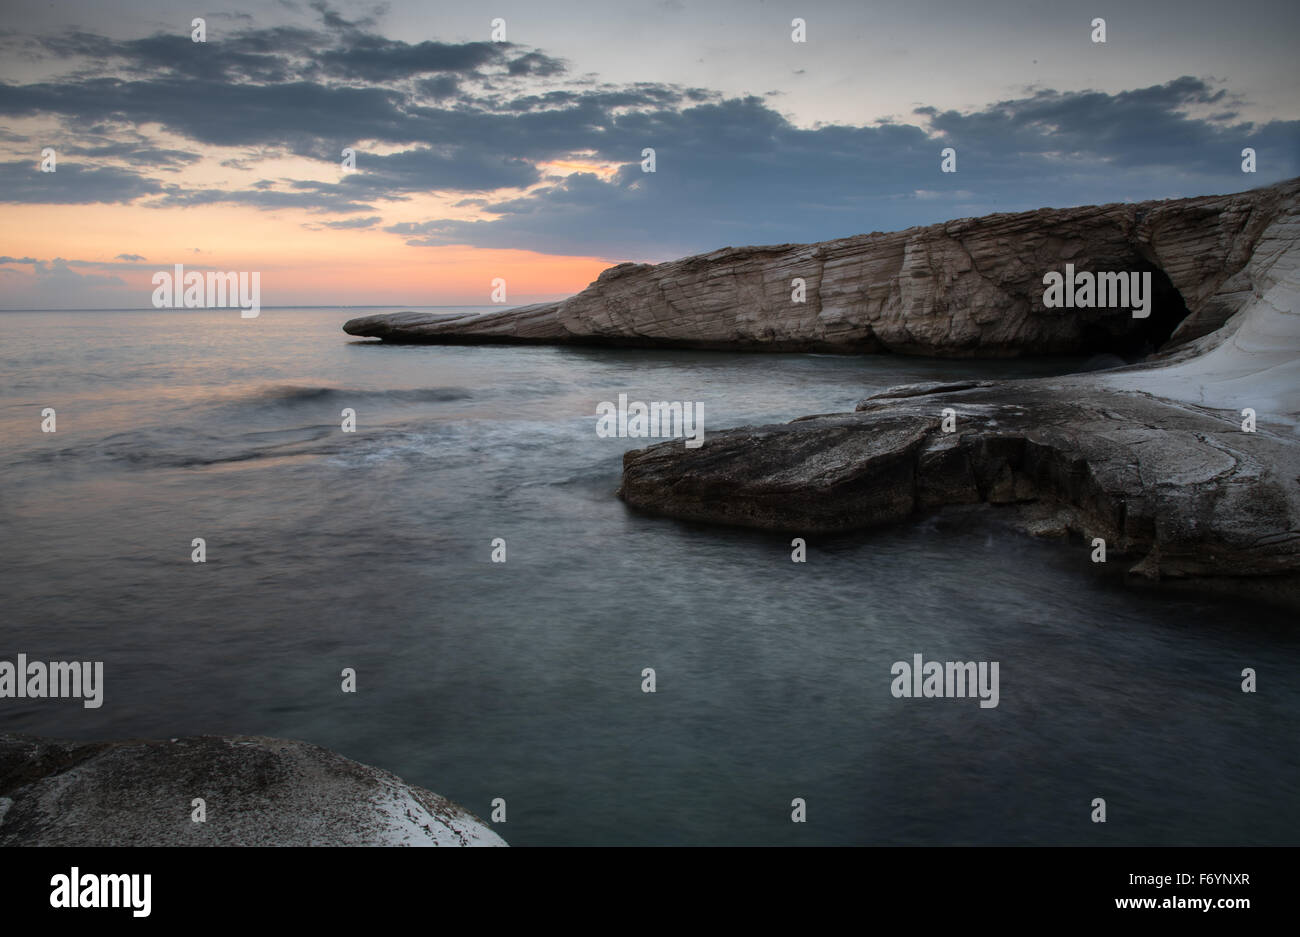 Dramatic Sunset in the in the ocean over a rocky  coast. Image taken  at Kavernos beach in Limassol Cyprus. Stock Photo